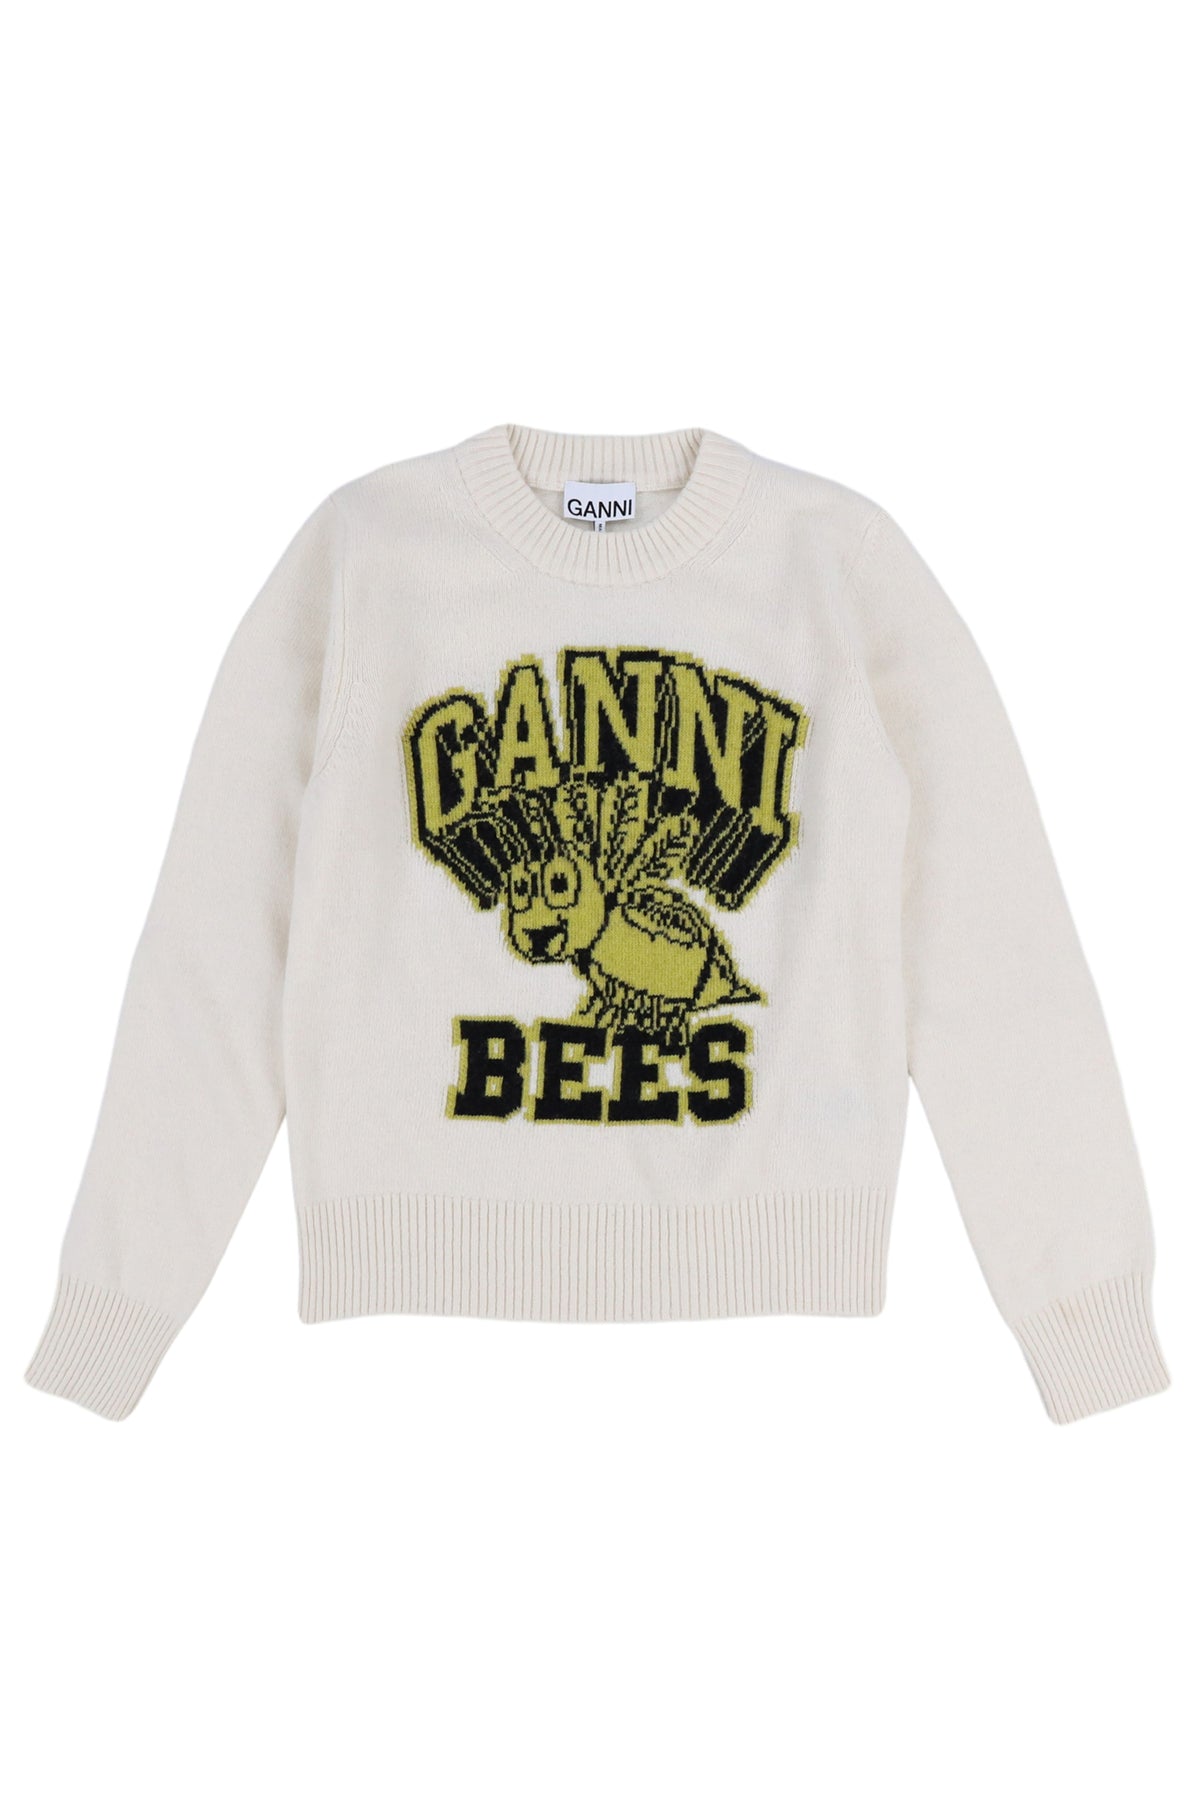 GRAPHIC PULLOVER BEES / IVR